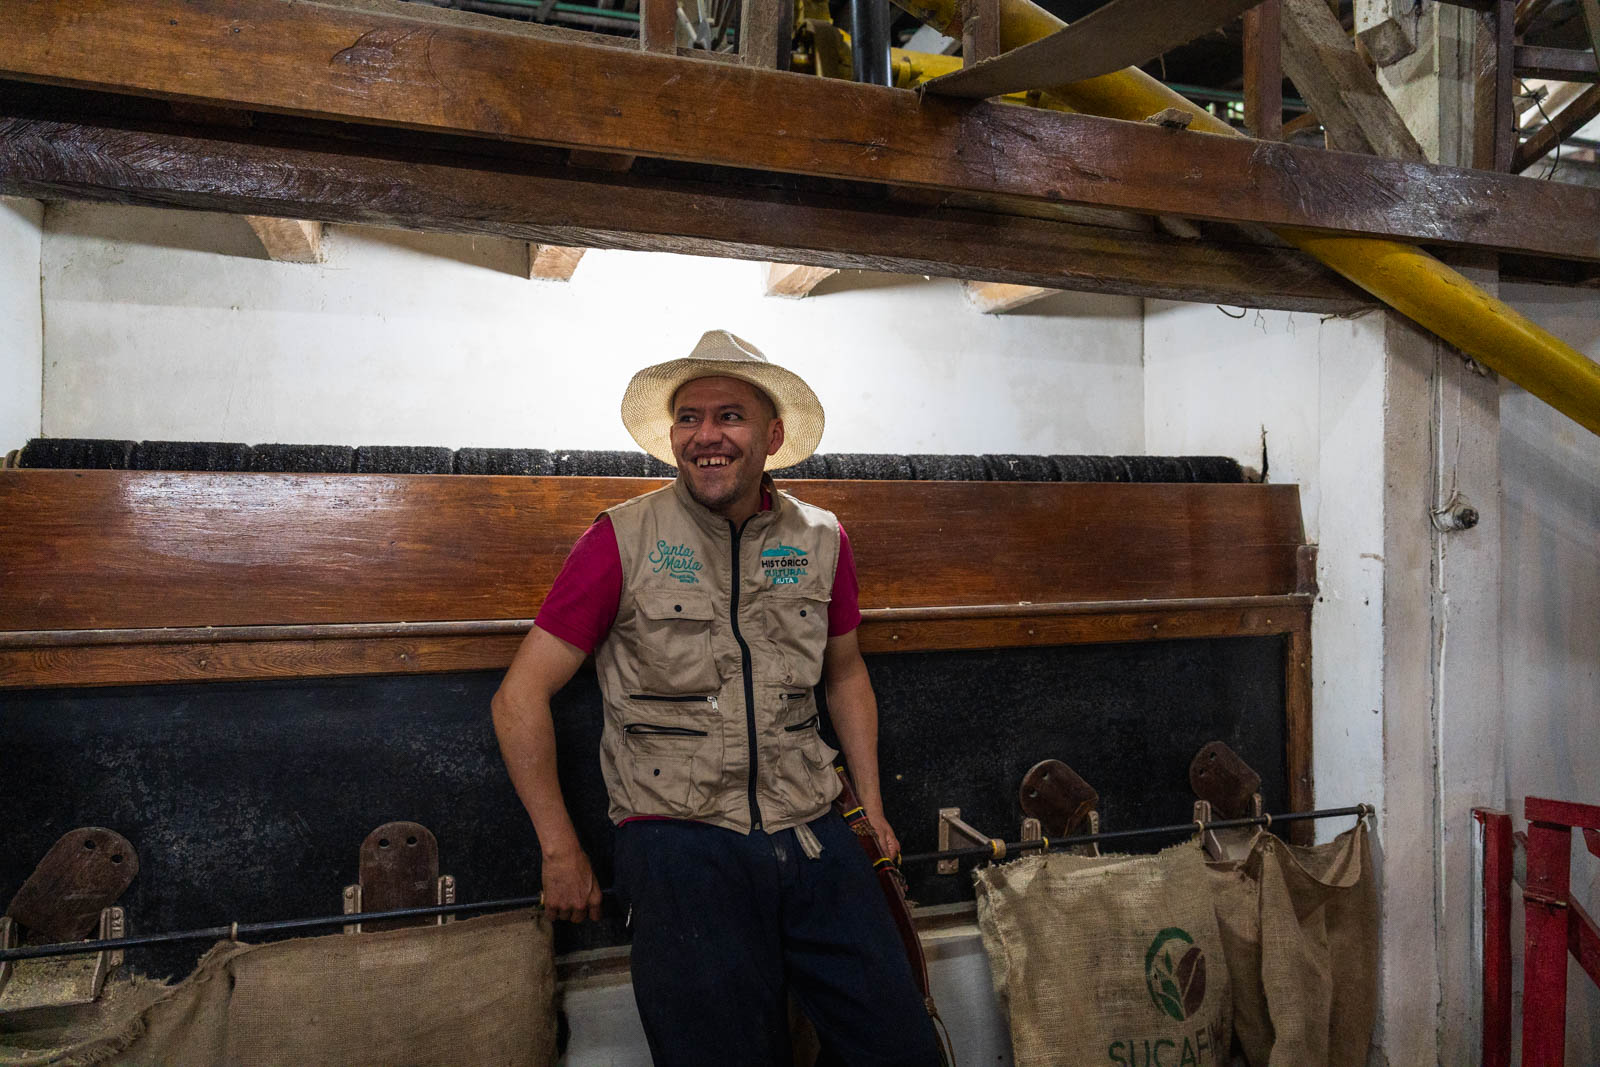 Our tour guide leaning against a factory machine wearing a sombrero and smiling at Finca La Victoria.